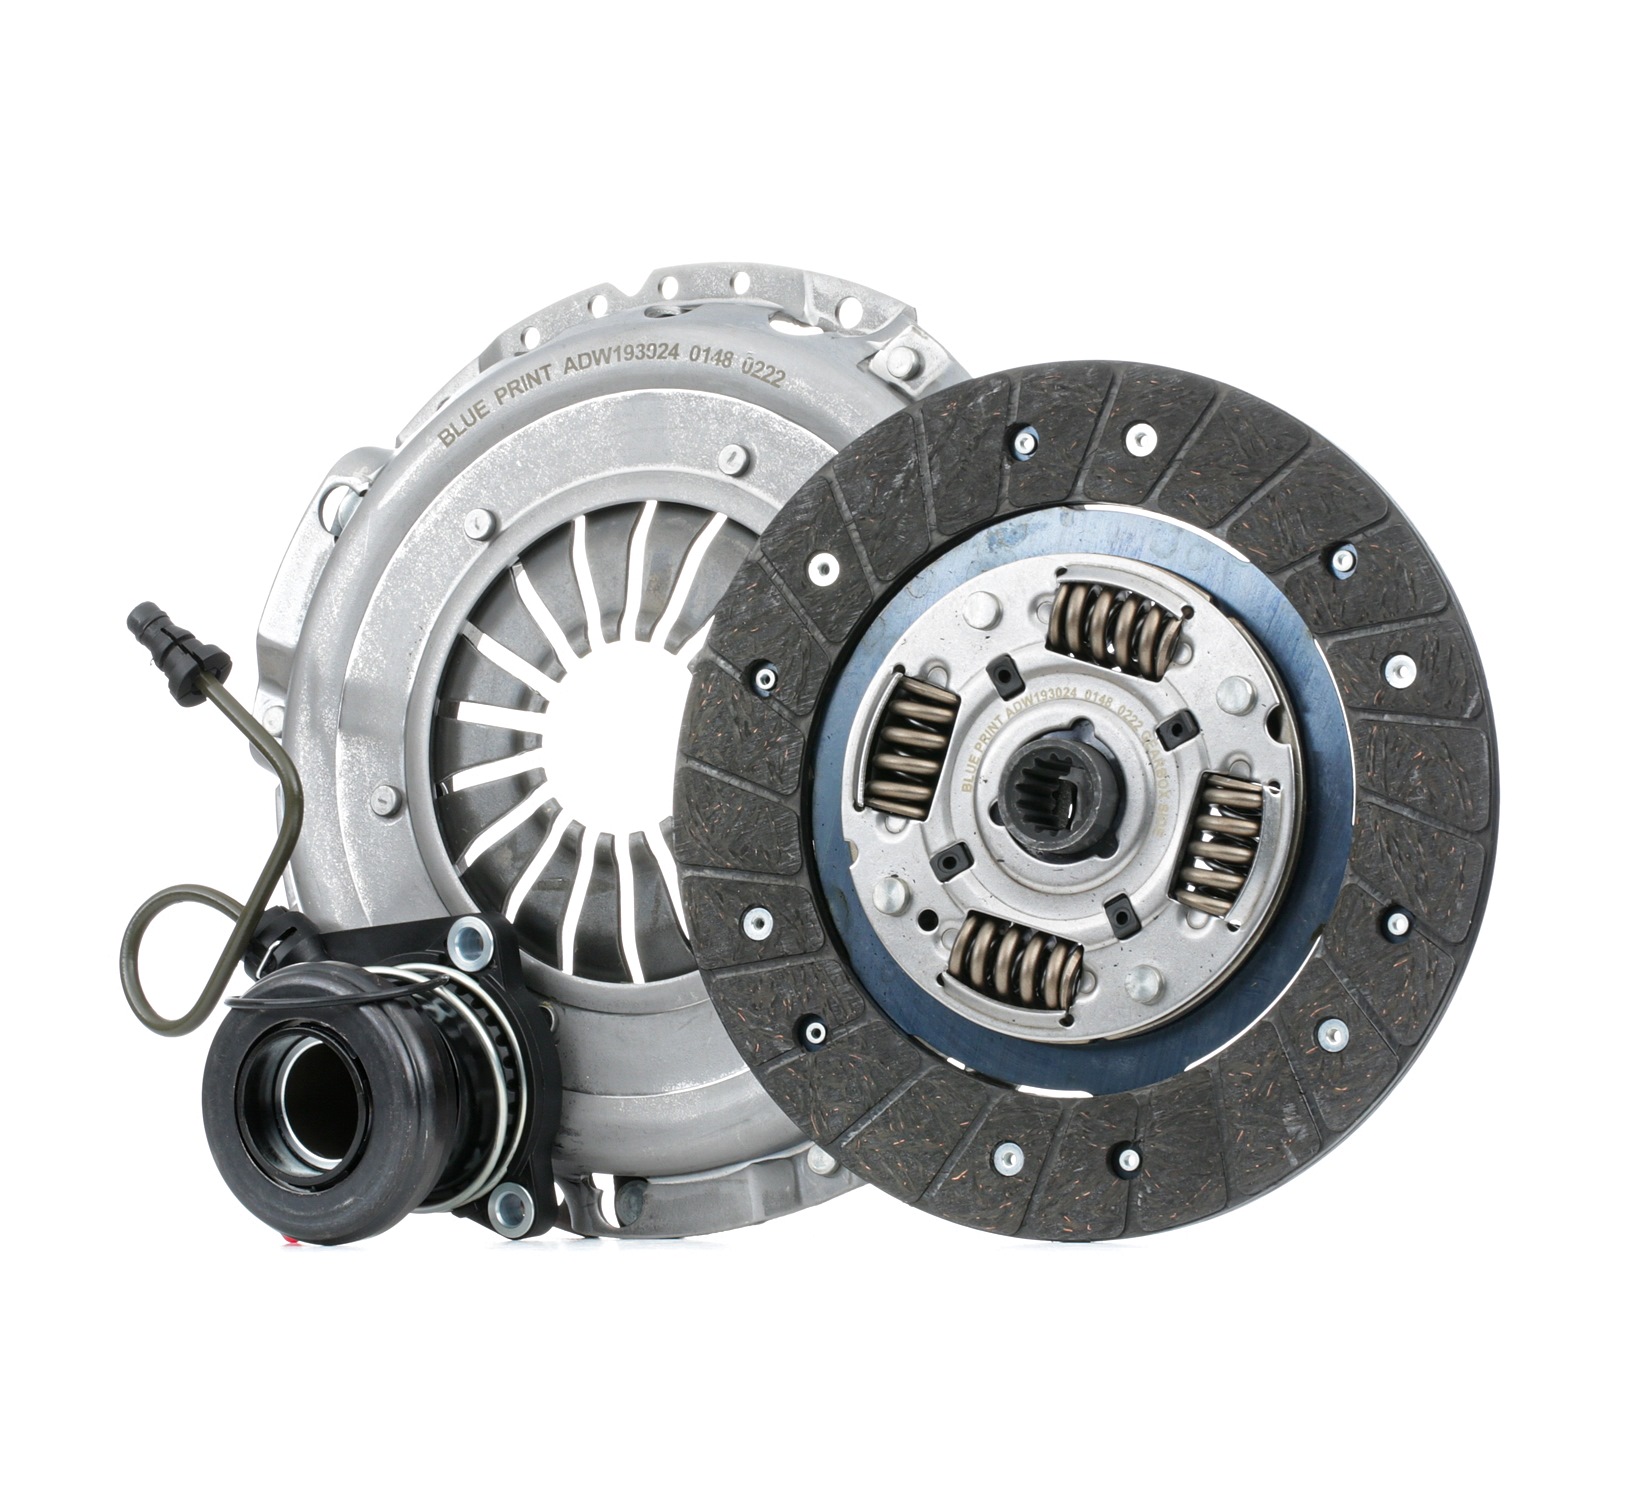 BLUE PRINT ADW193045 Clutch kit three-piece, with central slave cylinder, with synthetic grease, 200mm